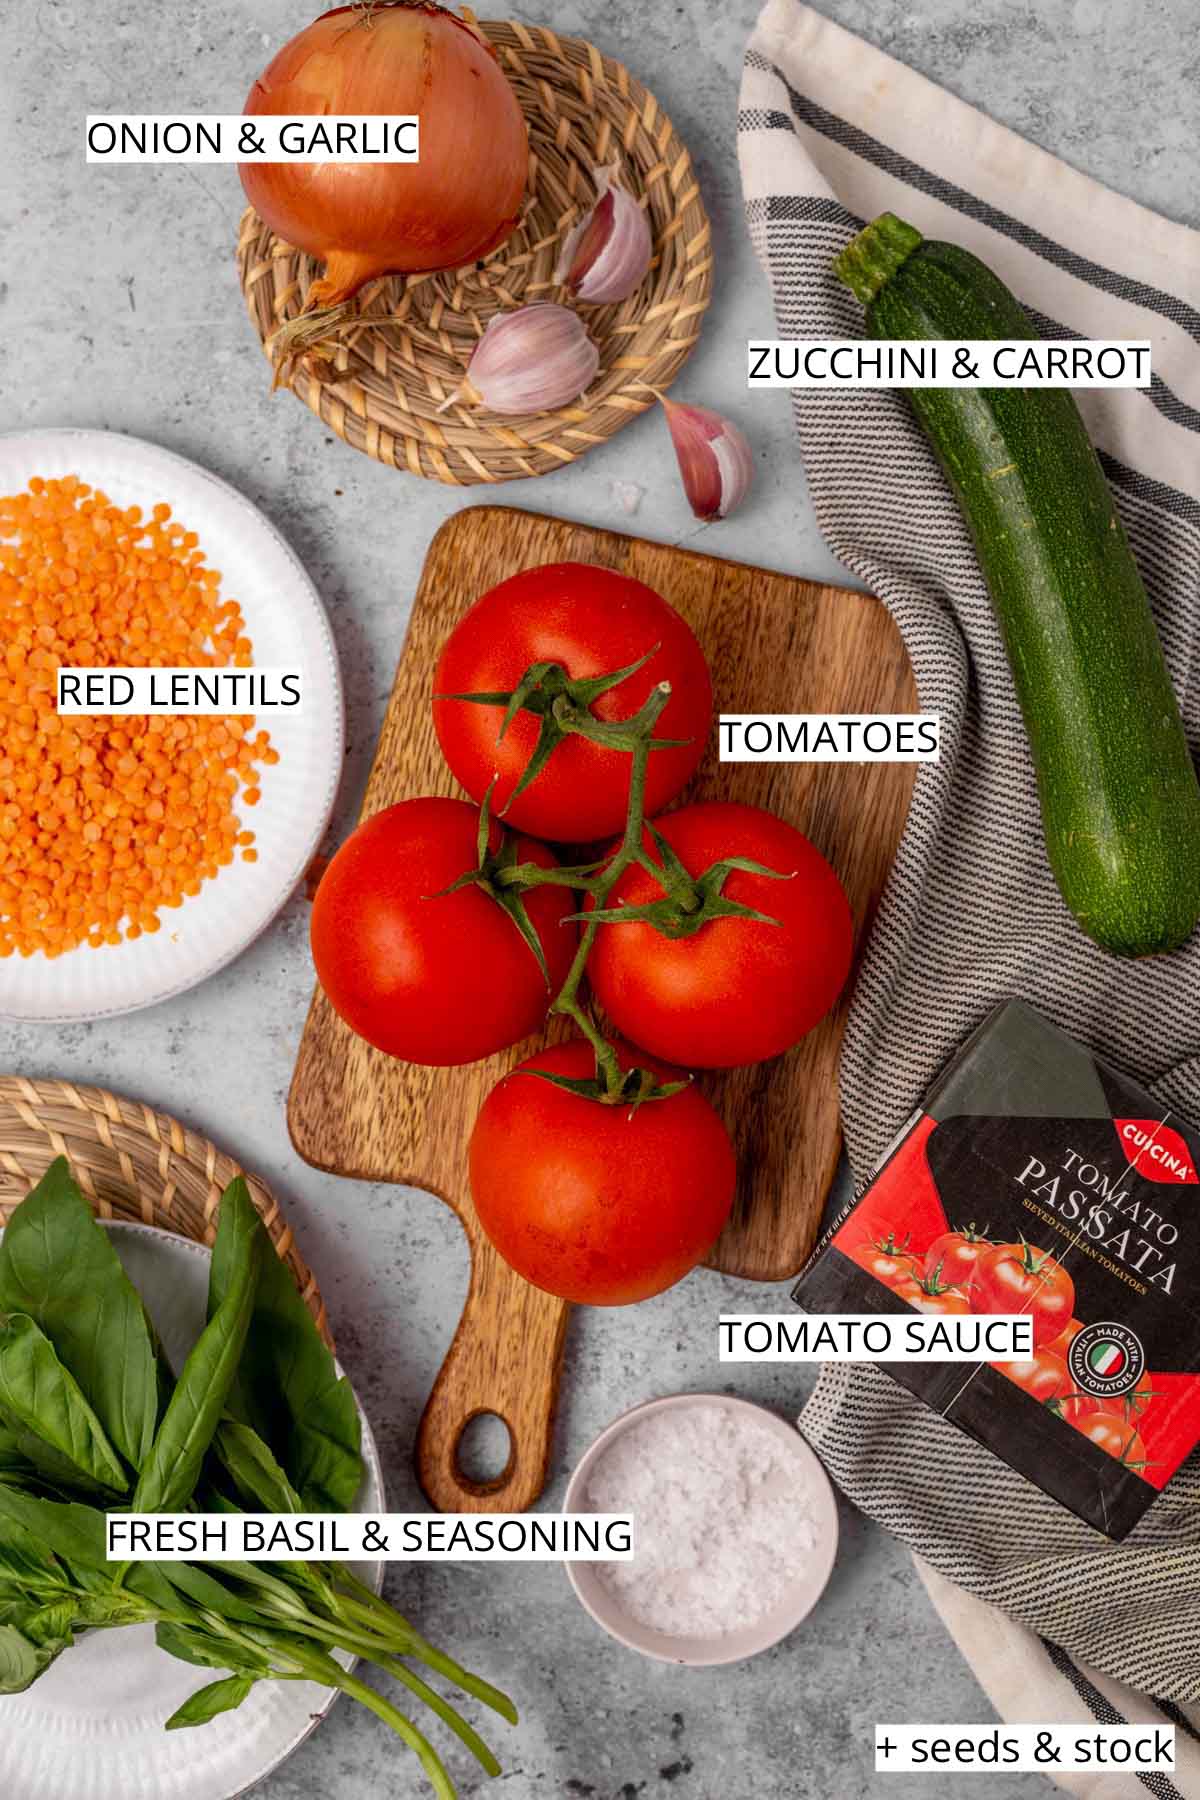 All ingredients needed to make protein tomato soup laid out.